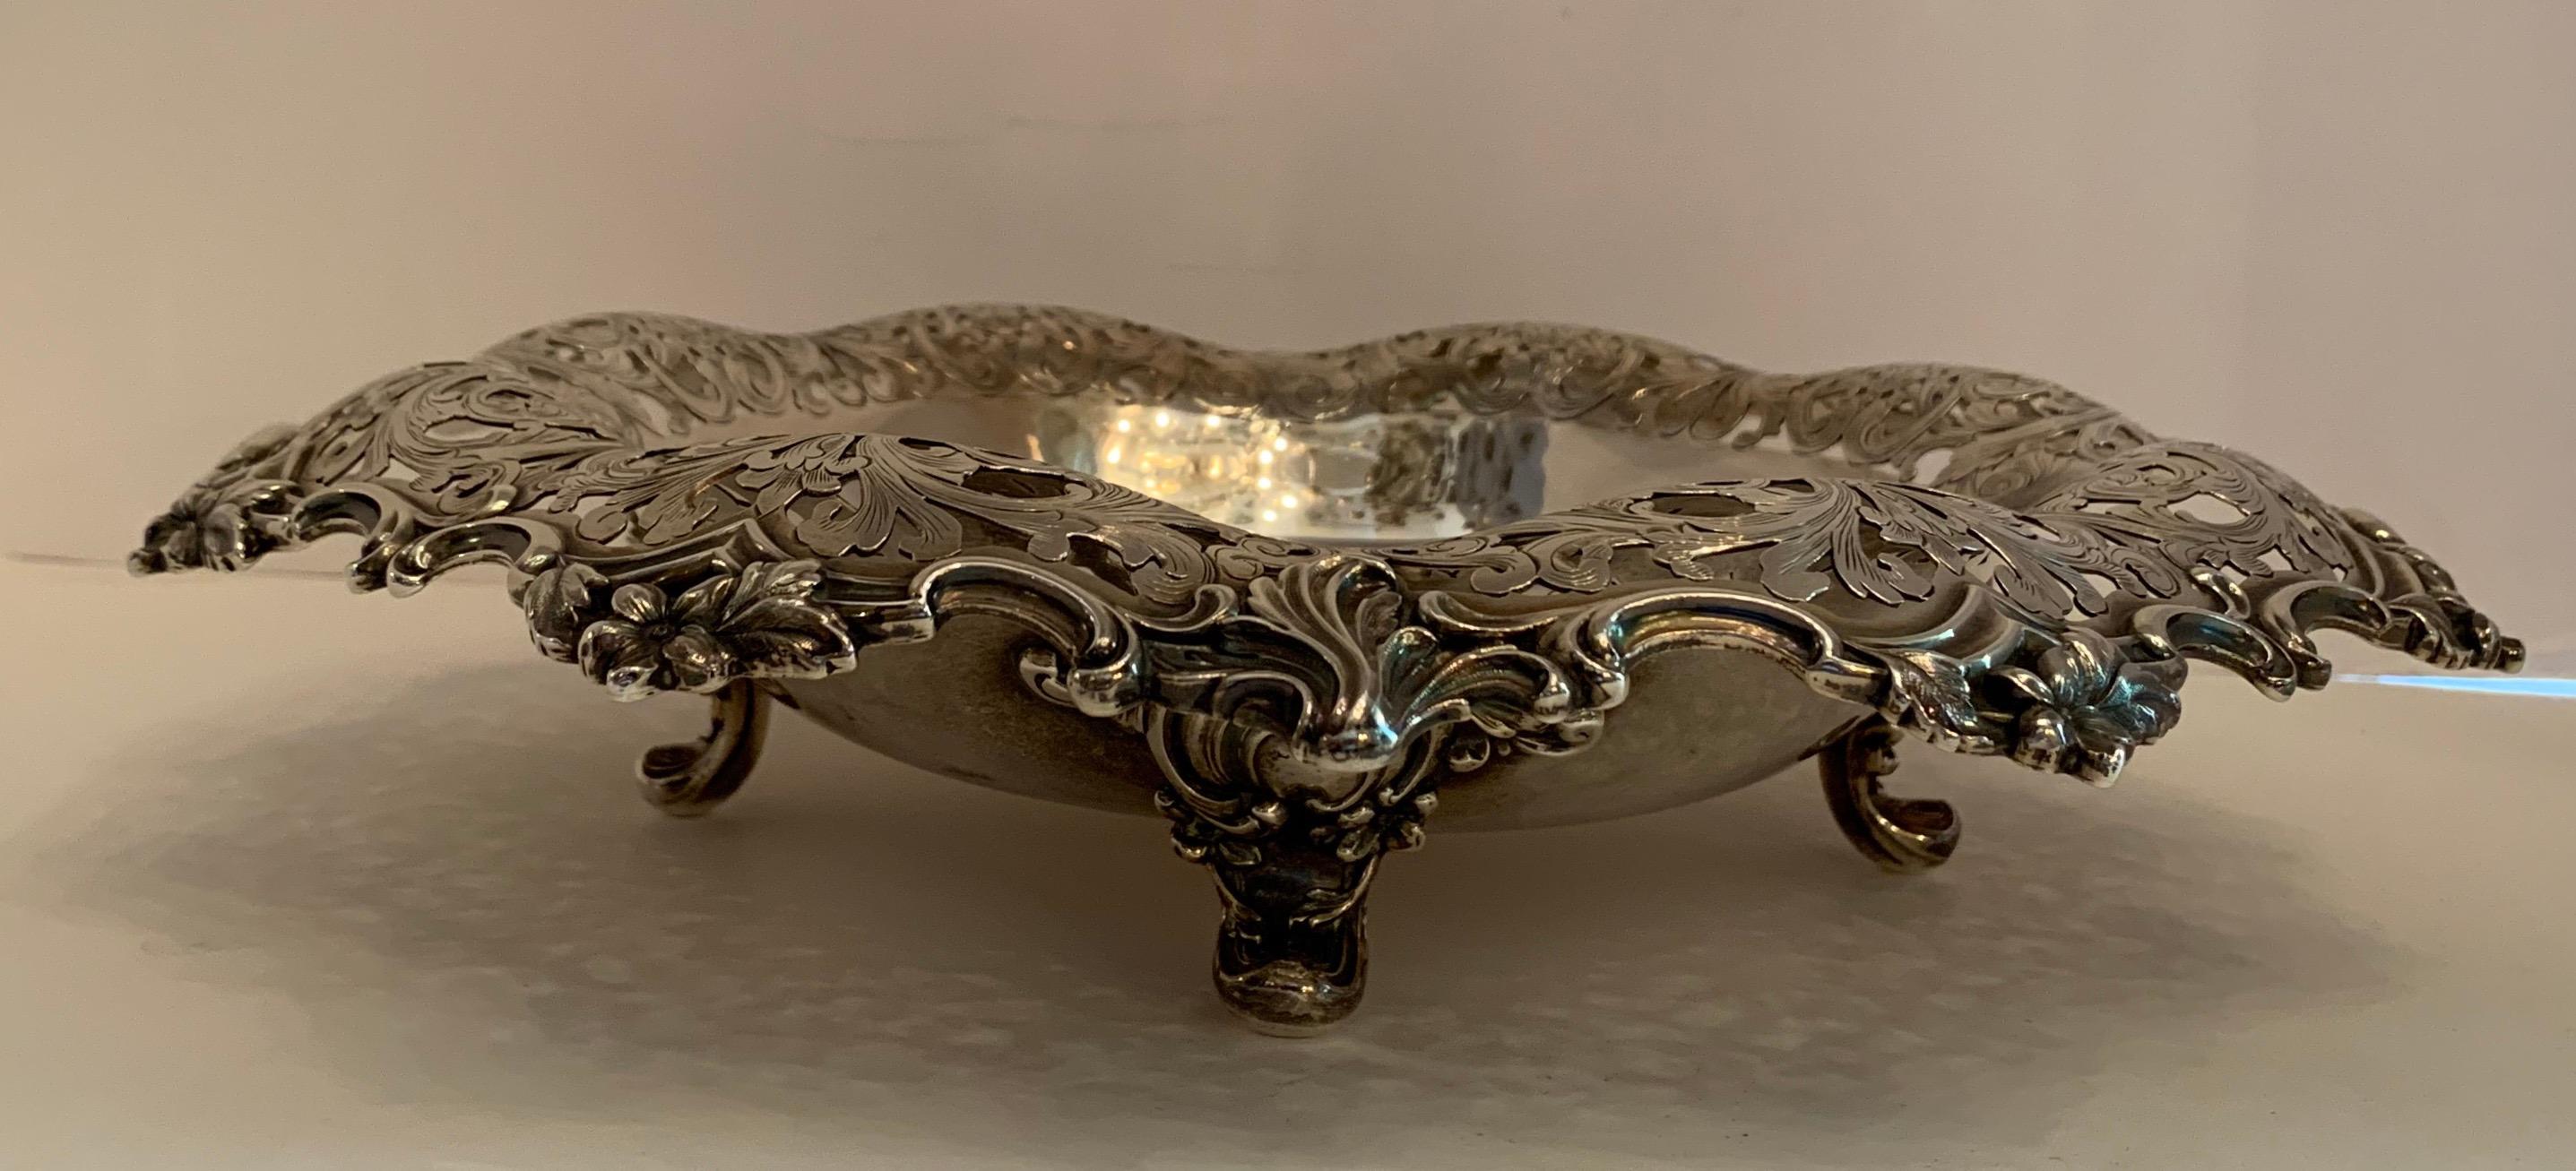 Belle Époque Wonderful Tiffany & Co. Sterling Silver Centerpiece Footed Pierced Bowl For Sale